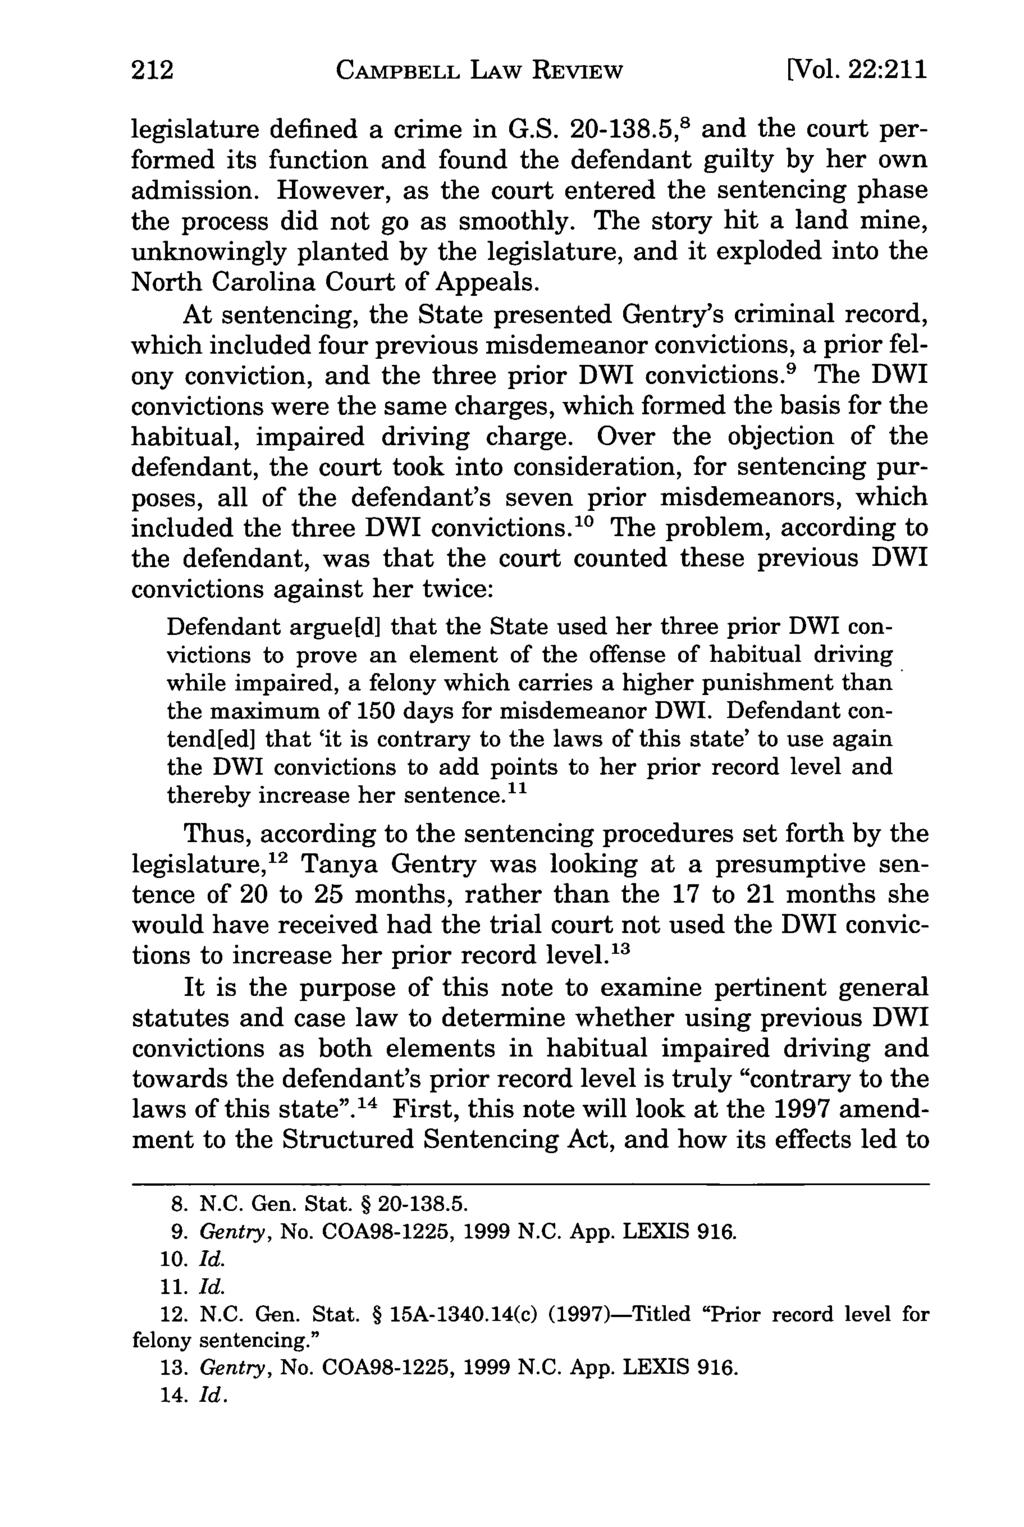 212 Campbell Law Review, Vol. 22, Iss. 1 [1999], Art. 7 CAMPBELL LAW REVIEW [Vol. 22:211 legislature defined a crime in G.S. 20-138.